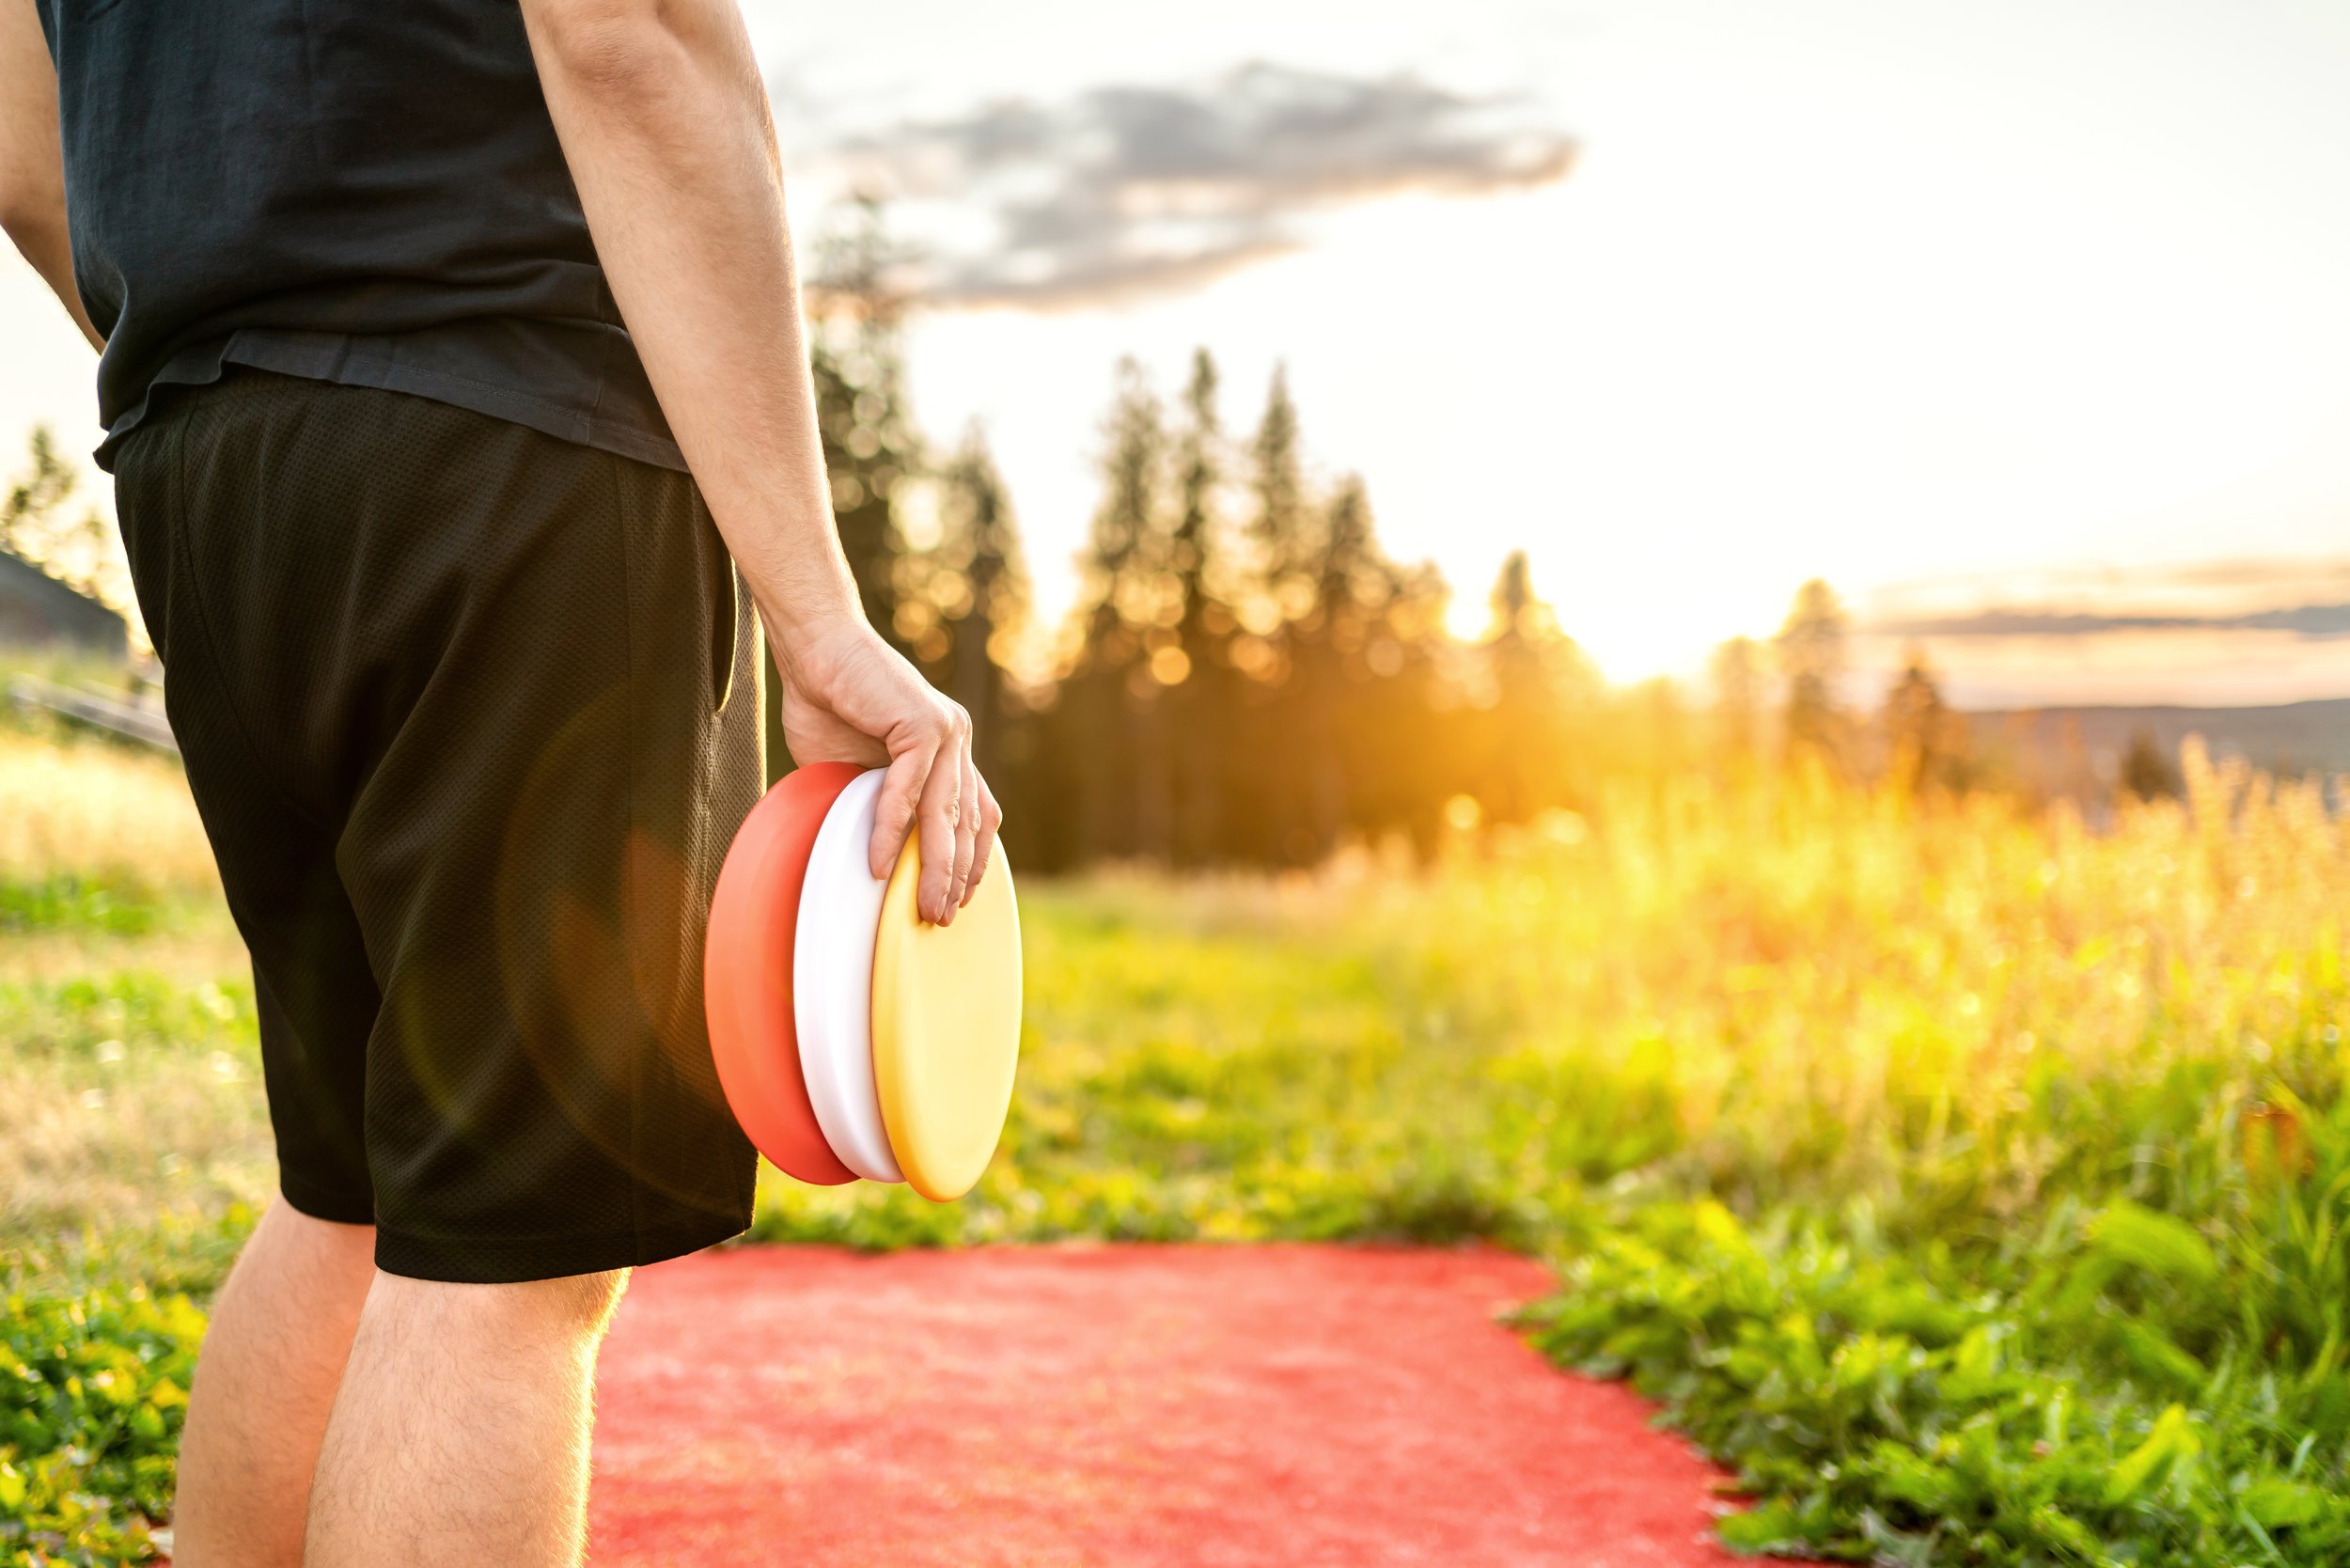 Disc golf in summer at sunset. Man with frisbee equipment in par